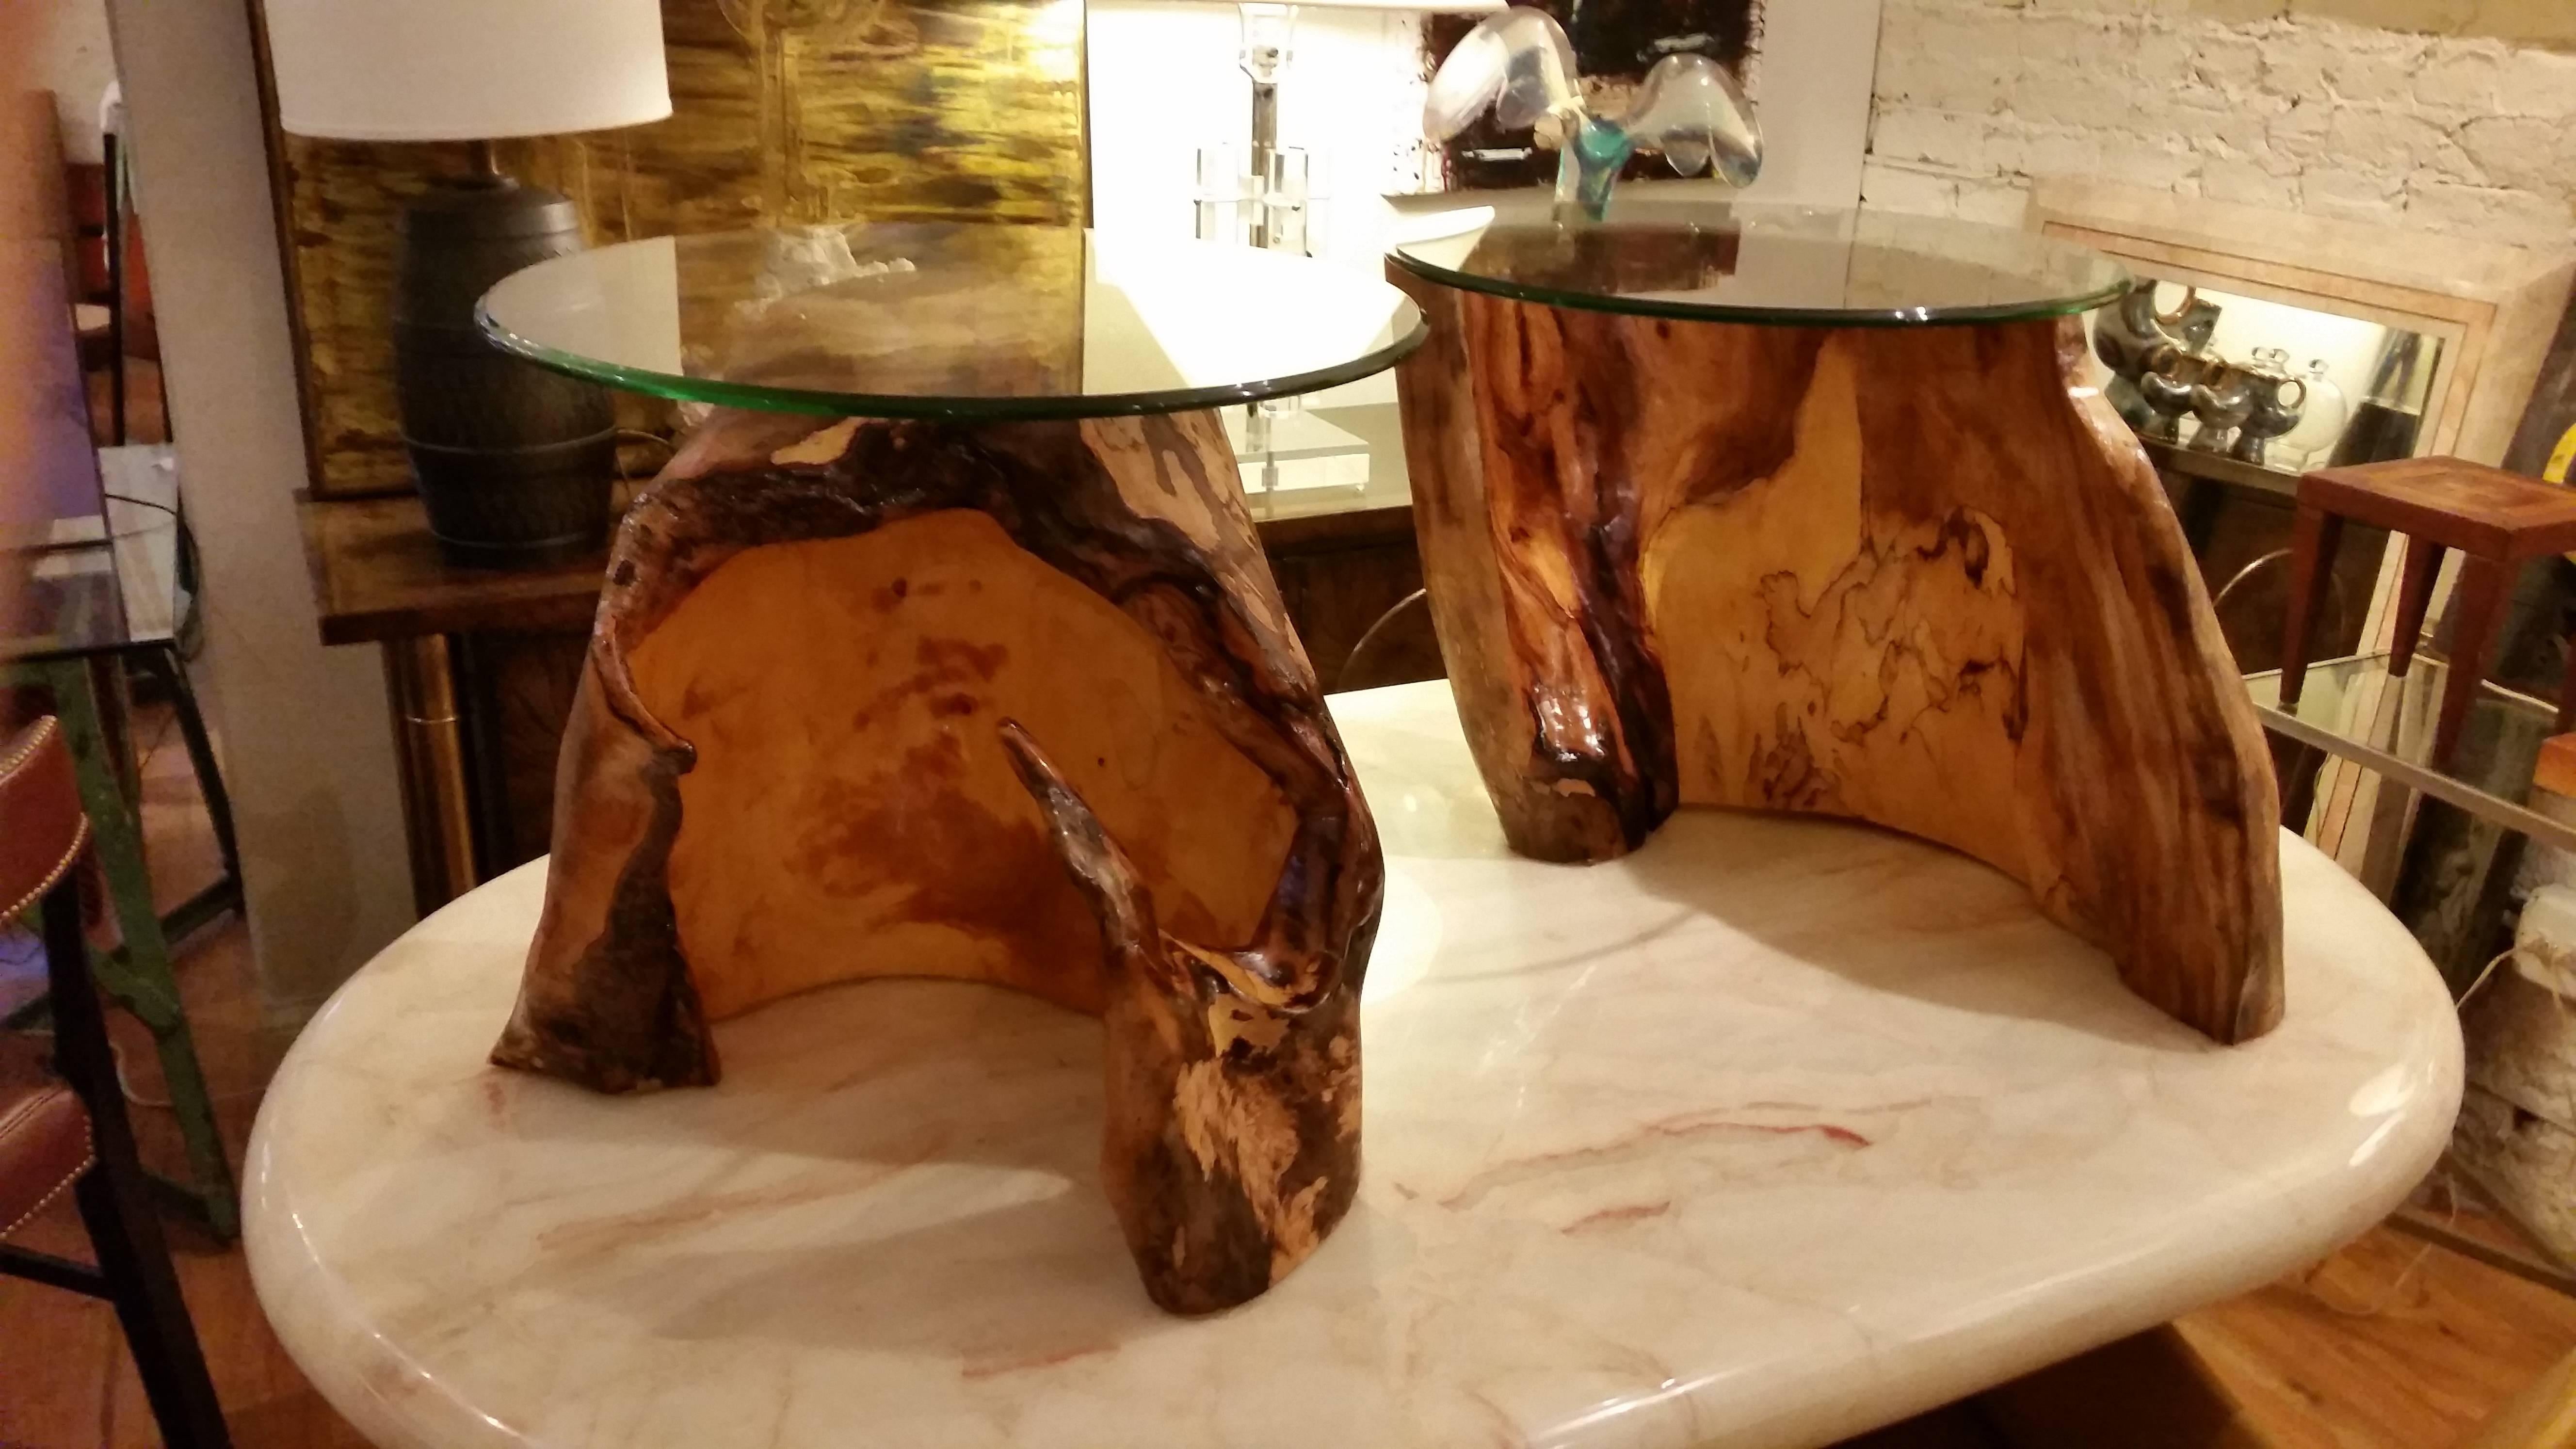 A pair of natural organic end tables topped with 20 inch.
Glass tops. Bold organic forms. Could work well as a coffee table.